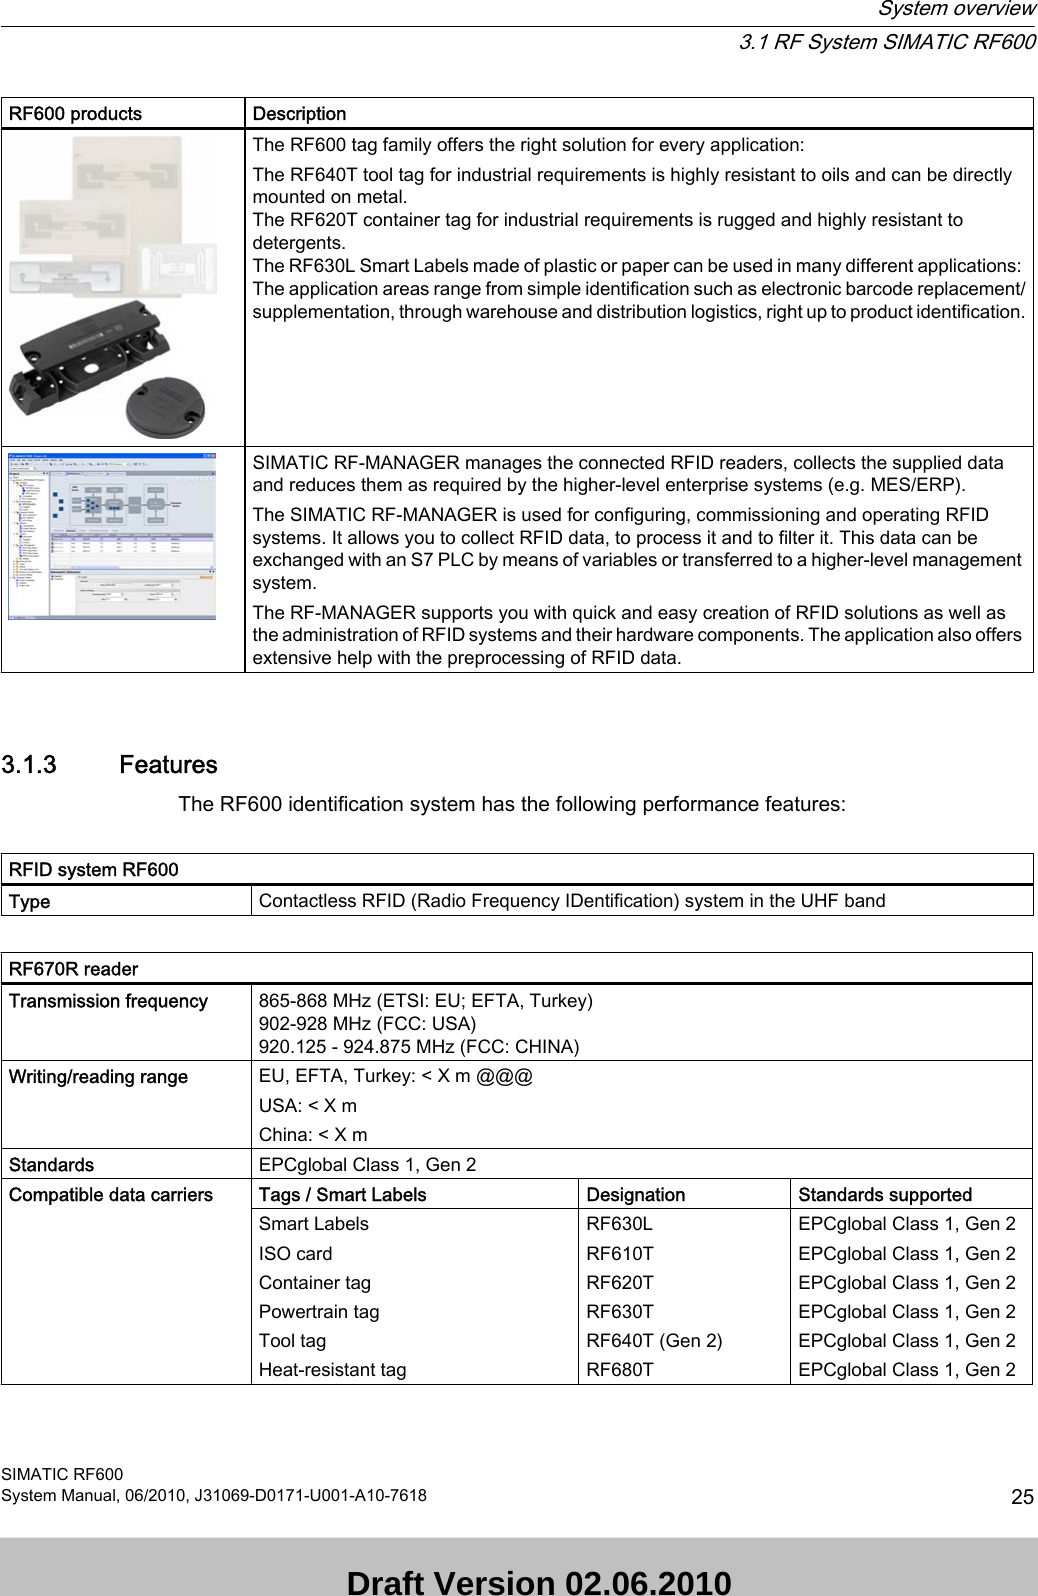 RF600 products DescriptionThe RF600 tag family offers the right solution for every application:The RF640T tool tag for industrial requirements is highly resistant to oils and can be directly mounted on metal. The RF620T container tag for industrial requirements is rugged and highly resistant to detergents. The RF630L Smart Labels made of plastic or paper can be used in many different applications: The application areas range from simple identification such as electronic barcode replacement/supplementation, through warehouse and distribution logistics, right up to product identification.SIMATIC RF-MANAGER manages the connected RFID readers, collects the supplied data and reduces them as required by the higher-level enterprise systems (e.g. MES/ERP).The SIMATIC RF-MANAGER is used for configuring, commissioning and operating RFID systems. It allows you to collect RFID data, to process it and to filter it. This data can be exchanged with an S7 PLC by means of variables or transferred to a higher-level management system. The RF-MANAGER supports you with quick and easy creation of RFID solutions as well as the administration of RFID systems and their hardware components. The application also offers extensive help with the preprocessing of RFID data.3.1.3 FeaturesThe RF600 identification system has the following performance features:    RFID system RF600Type Contactless RFID (Radio Frequency IDentification) system in the UHF bandRF670R readerTransmission frequency 865-868 MHz (ETSI: EU; EFTA, Turkey)902-928 MHz (FCC: USA)920.125 - 924.875 MHz (FCC: CHINA)Writing/reading range EU, EFTA, Turkey: &lt; X m @@@USA: &lt; X mChina: &lt; X mStandards EPCglobal Class 1, Gen 2Compatible data carriers Tags / Smart Labels Designation Standards supportedSmart Labels ISO cardContainer tag Powertrain tagTool tagHeat-resistant tagRF630LRF610TRF620TRF630TRF640T (Gen 2)RF680TEPCglobal Class 1, Gen 2EPCglobal Class 1, Gen 2EPCglobal Class 1, Gen 2EPCglobal Class 1, Gen 2EPCglobal Class 1, Gen 2EPCglobal Class 1, Gen 2System overview3.1 RF System SIMATIC RF600SIMATIC RF600System Manual, 06/2010, J31069-D0171-U001-A10-7618 25 Draft Version 02.06.2010 